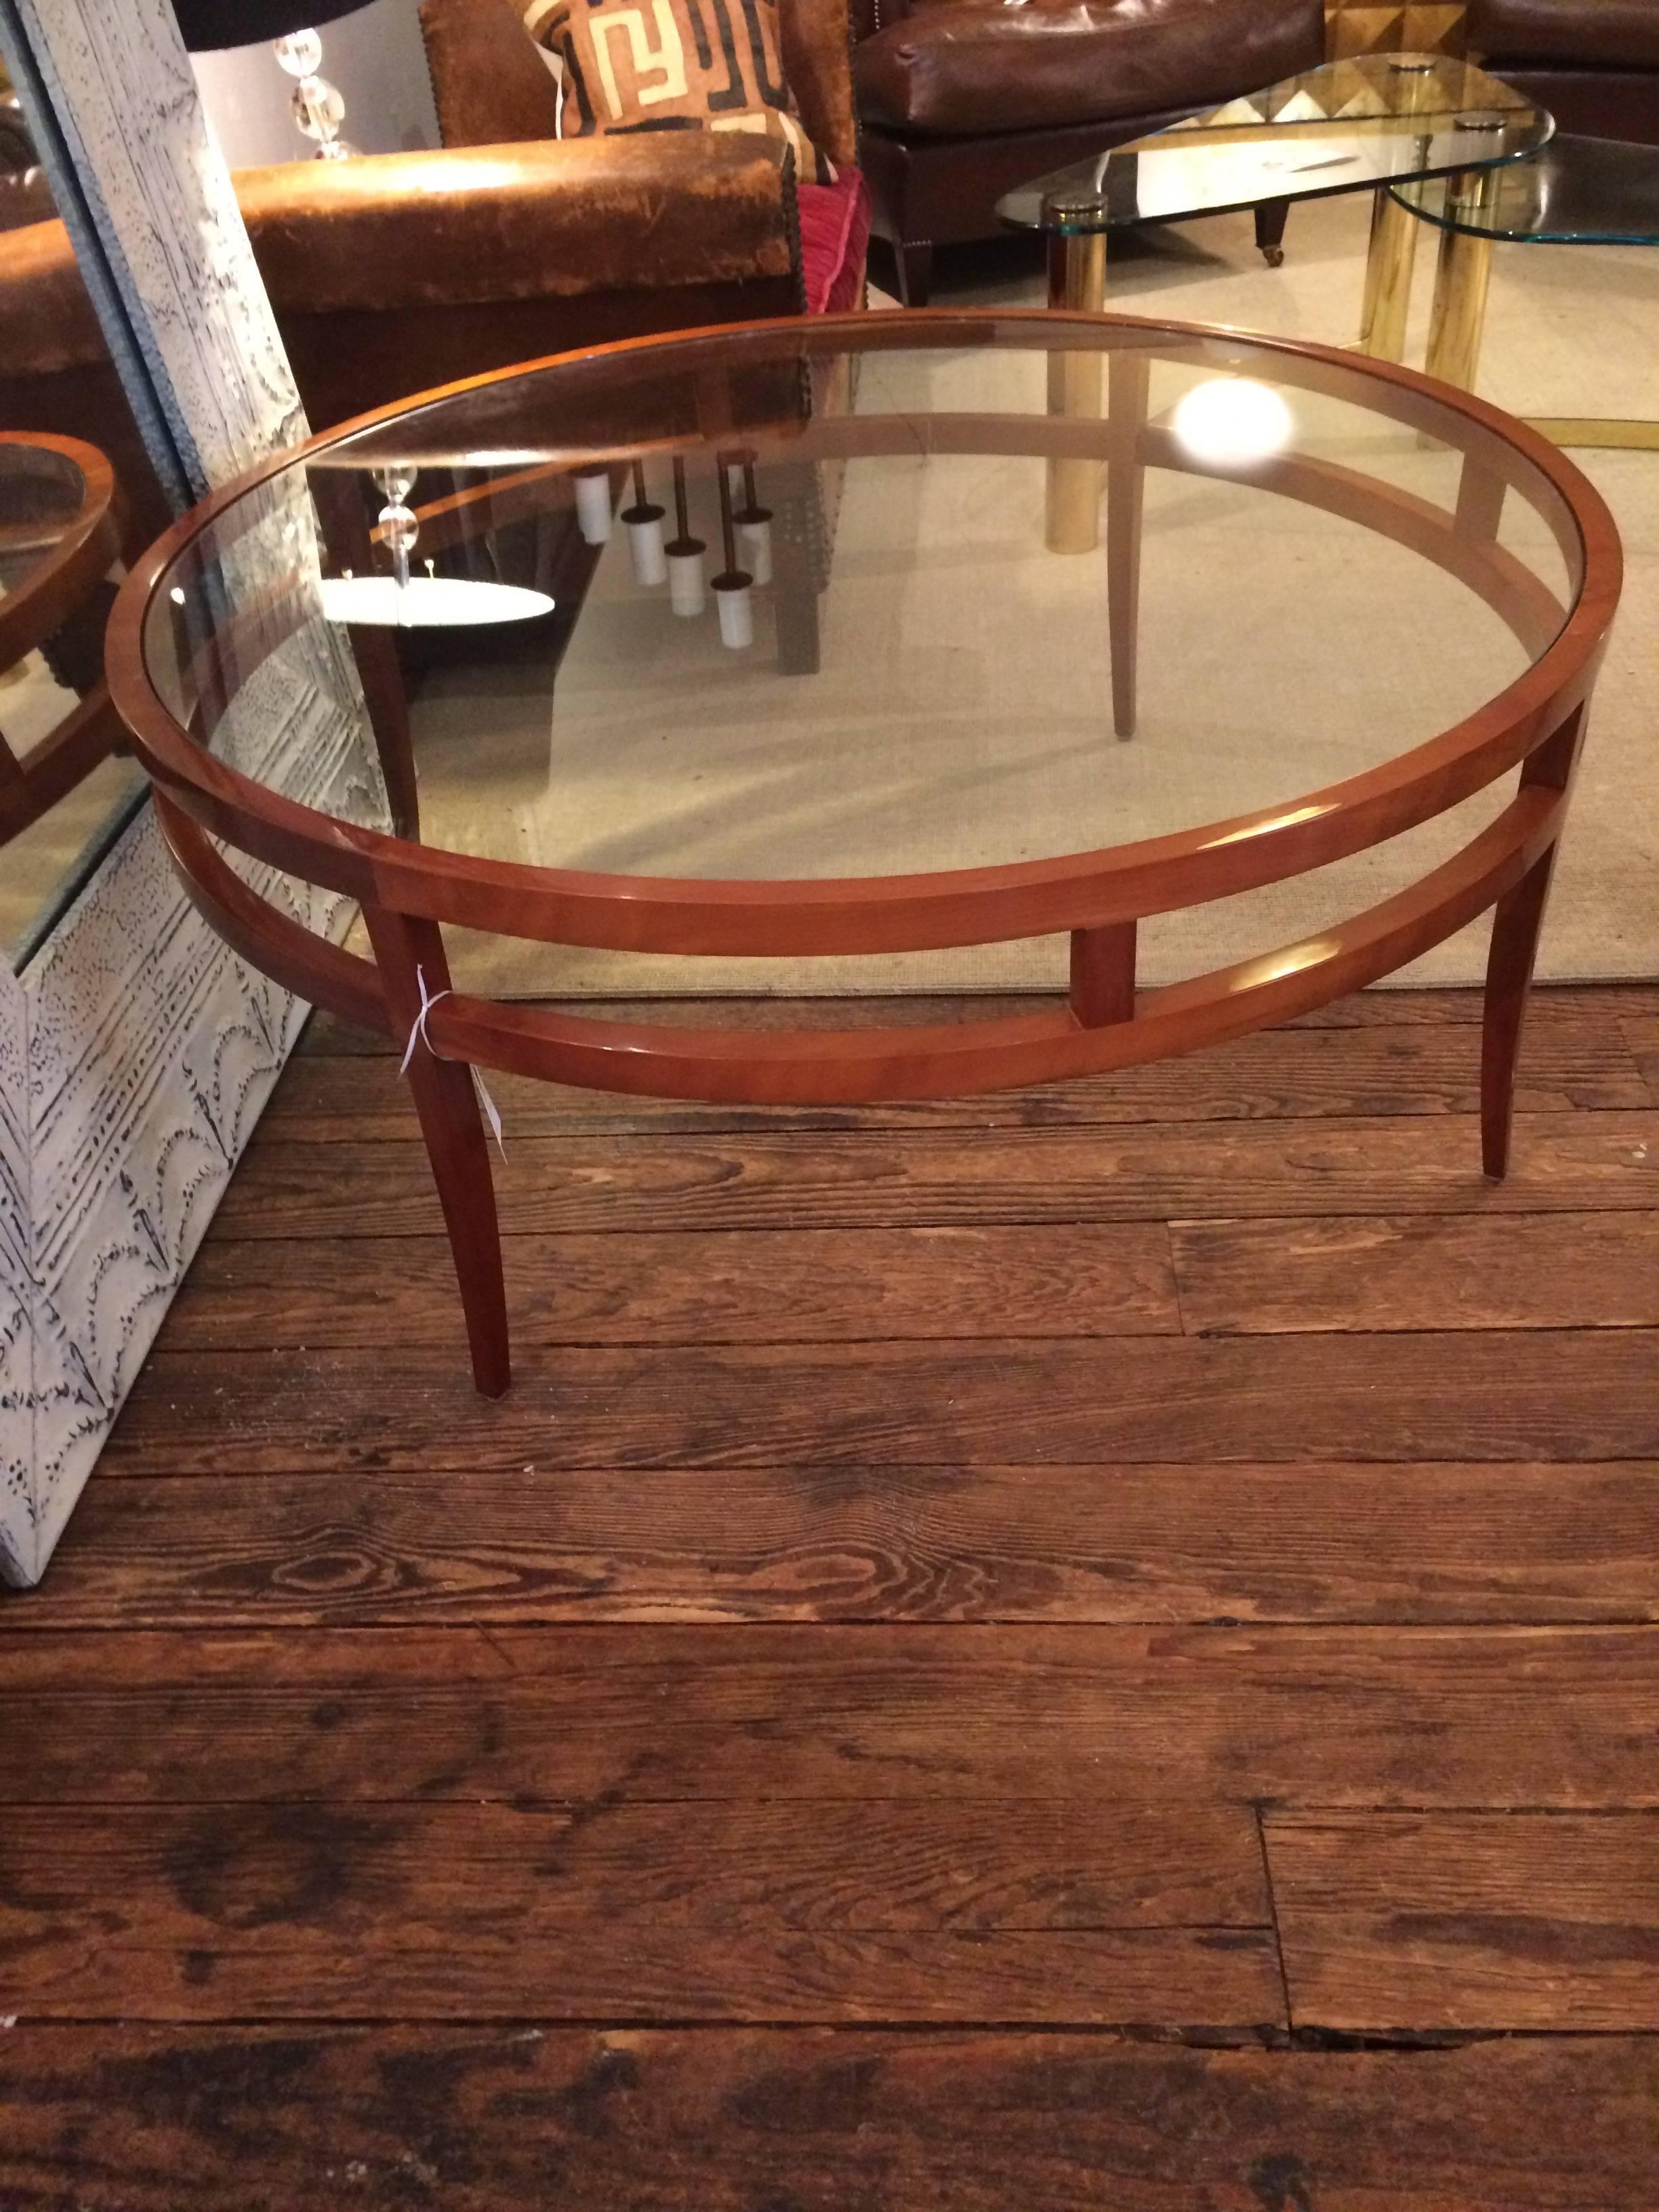 Sleek coffee table having a high gloss honey colored wooden cherry base with elegant tapered legs and a very large round glass top.